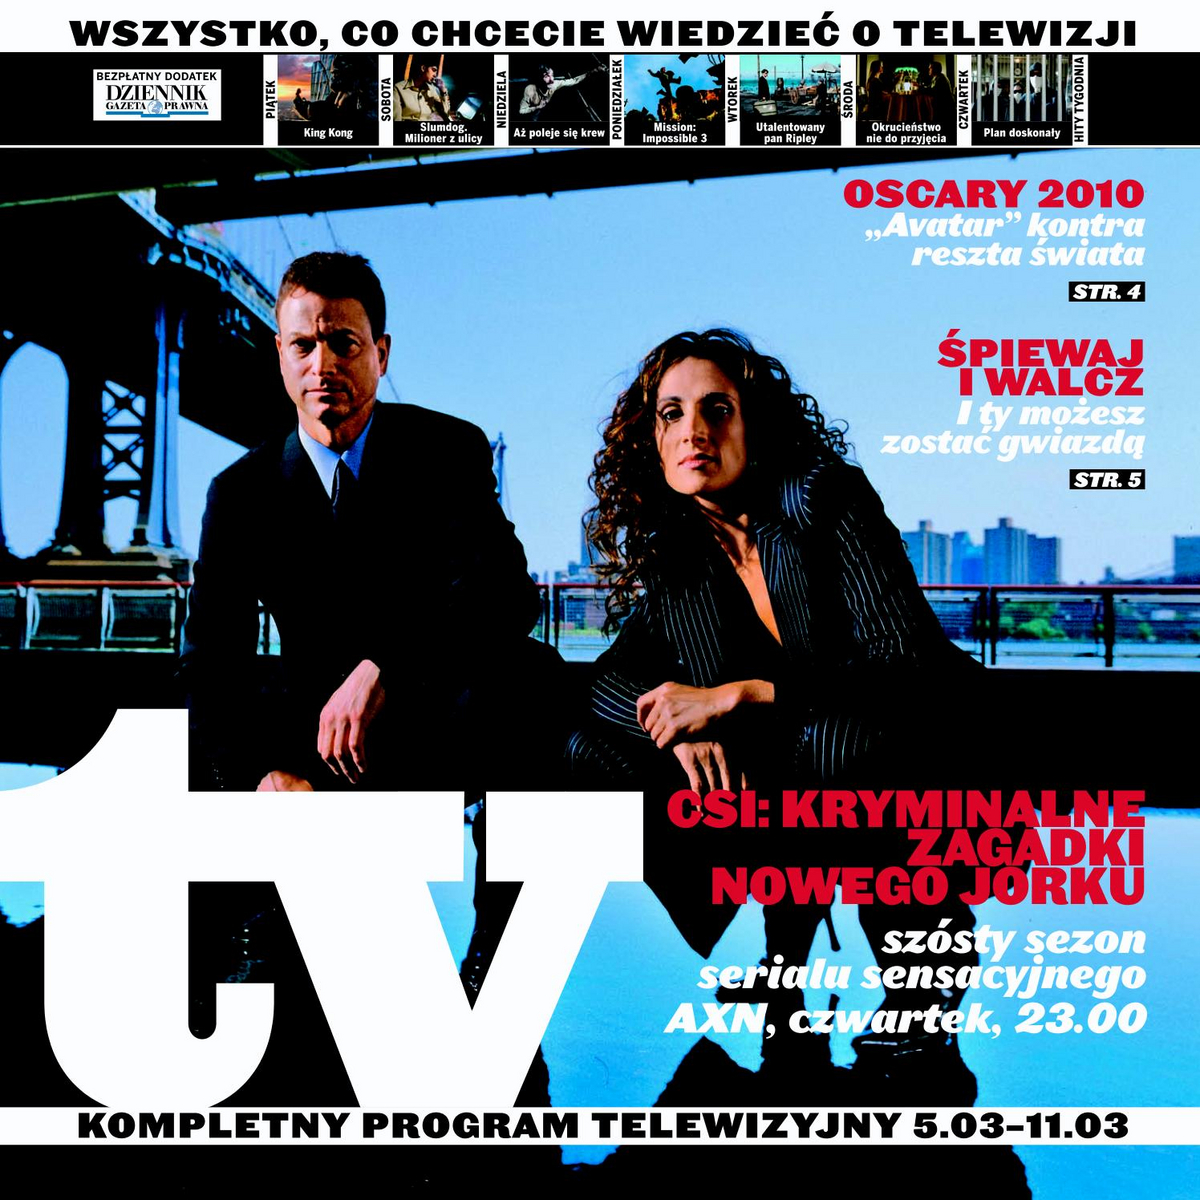 TV_cover